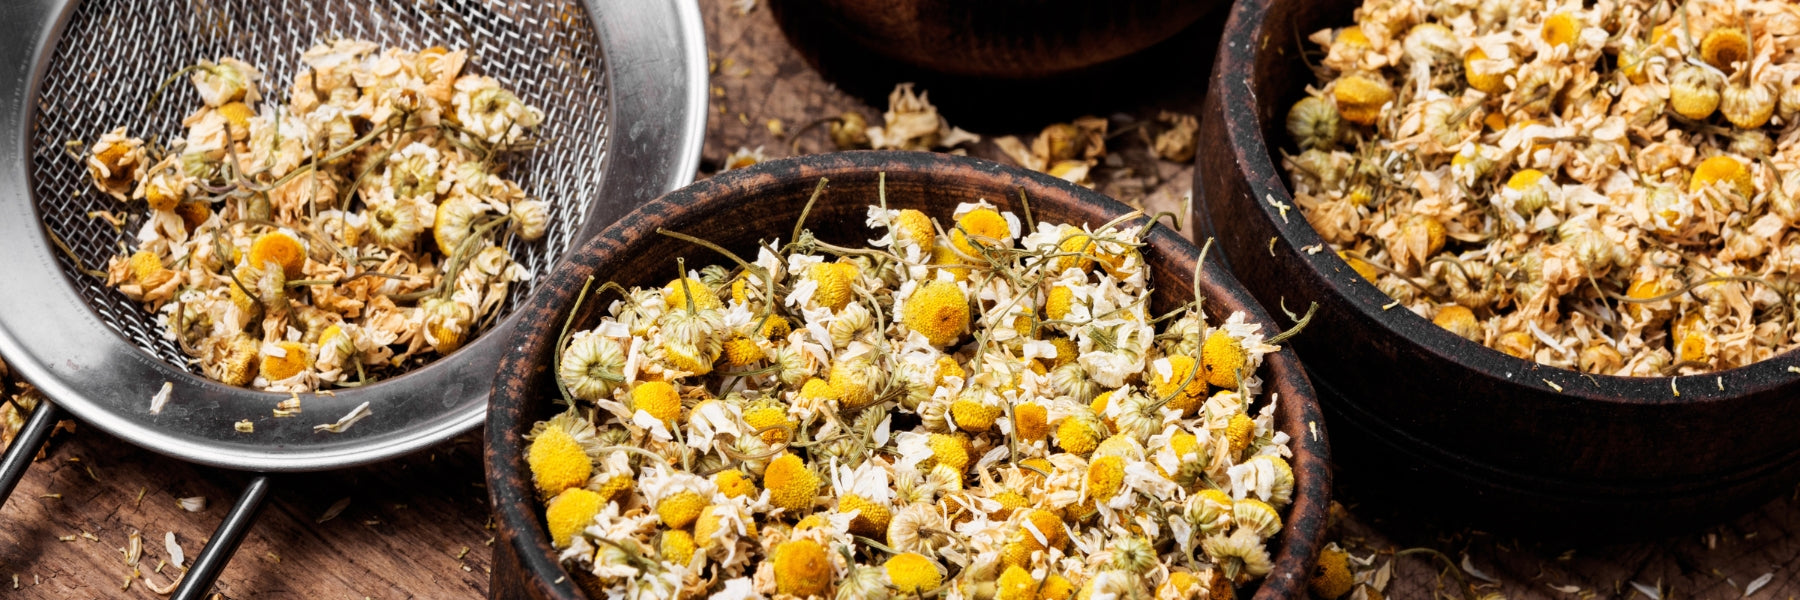 Chamomile - More Than Just a Cup of Tea | NatroVital